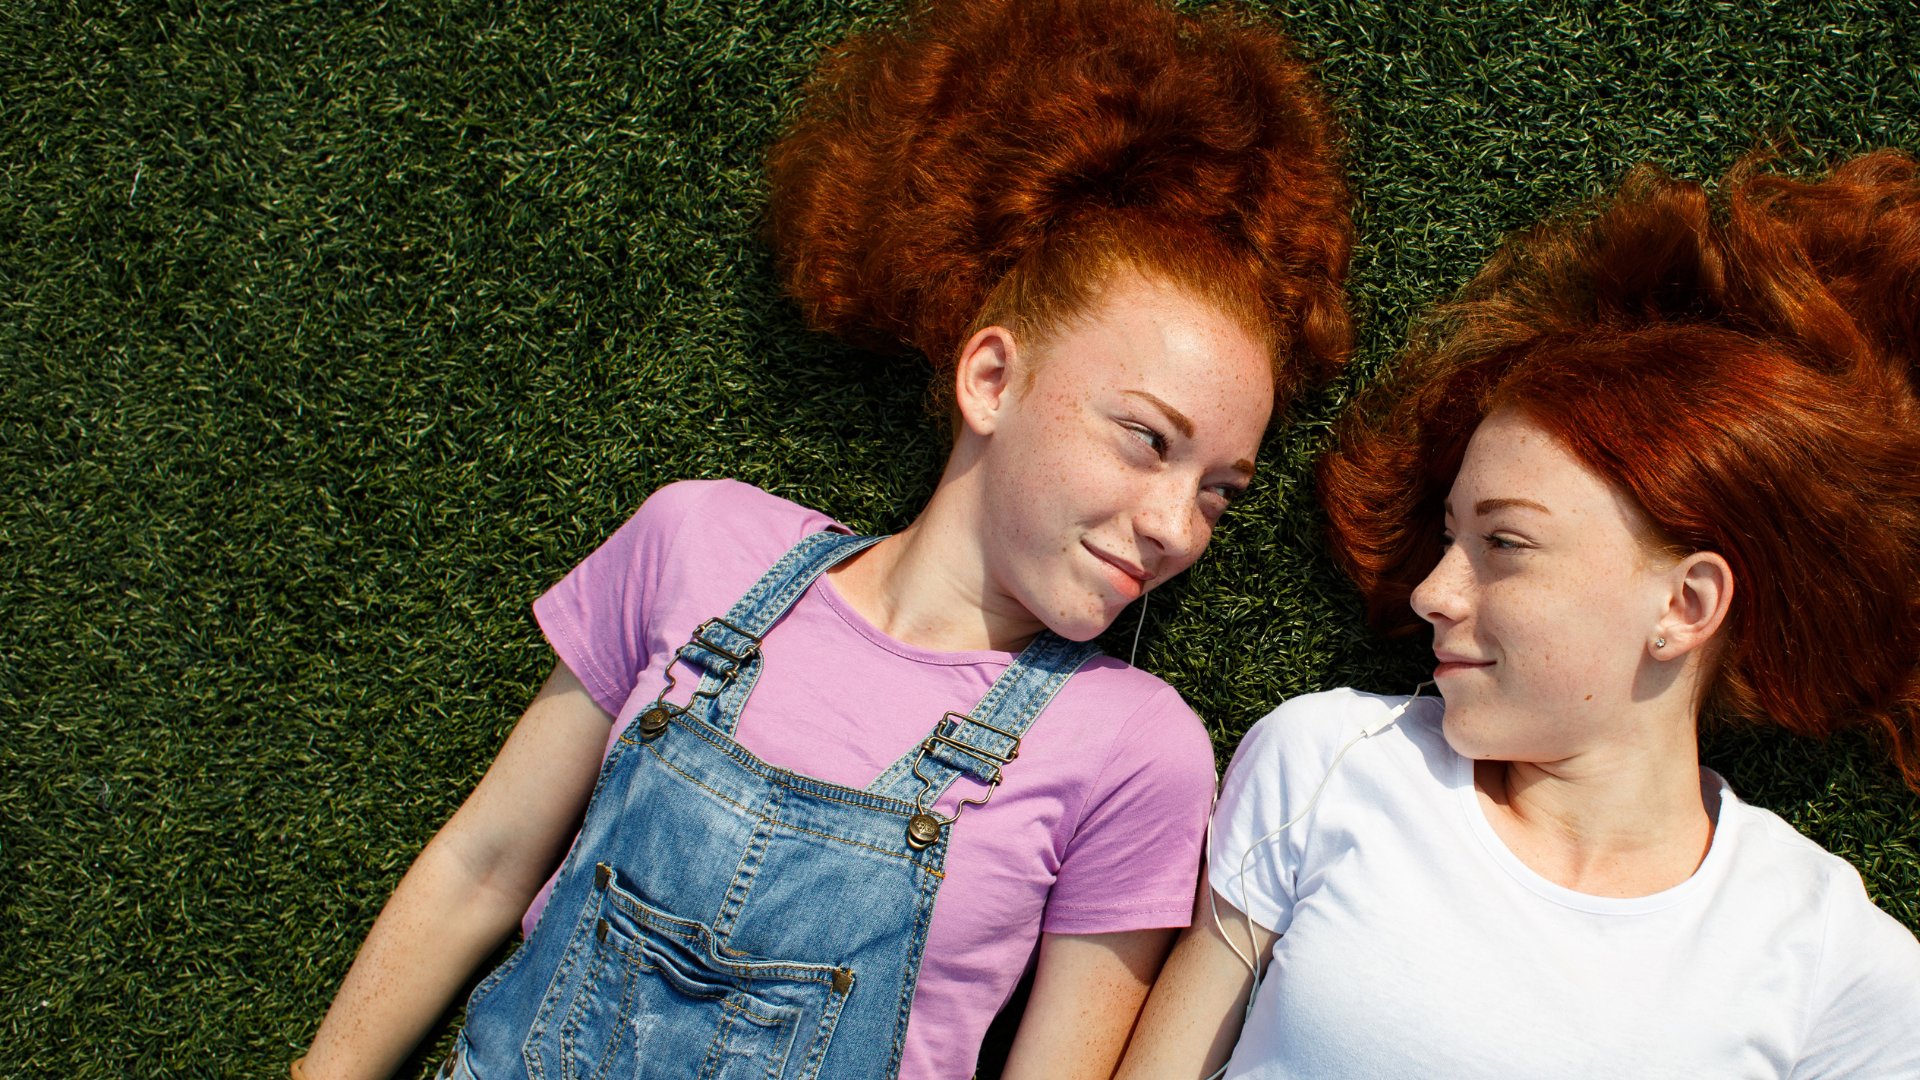 7 Gifts to Treat Your Redhead BFF on National Best Friend’s Day